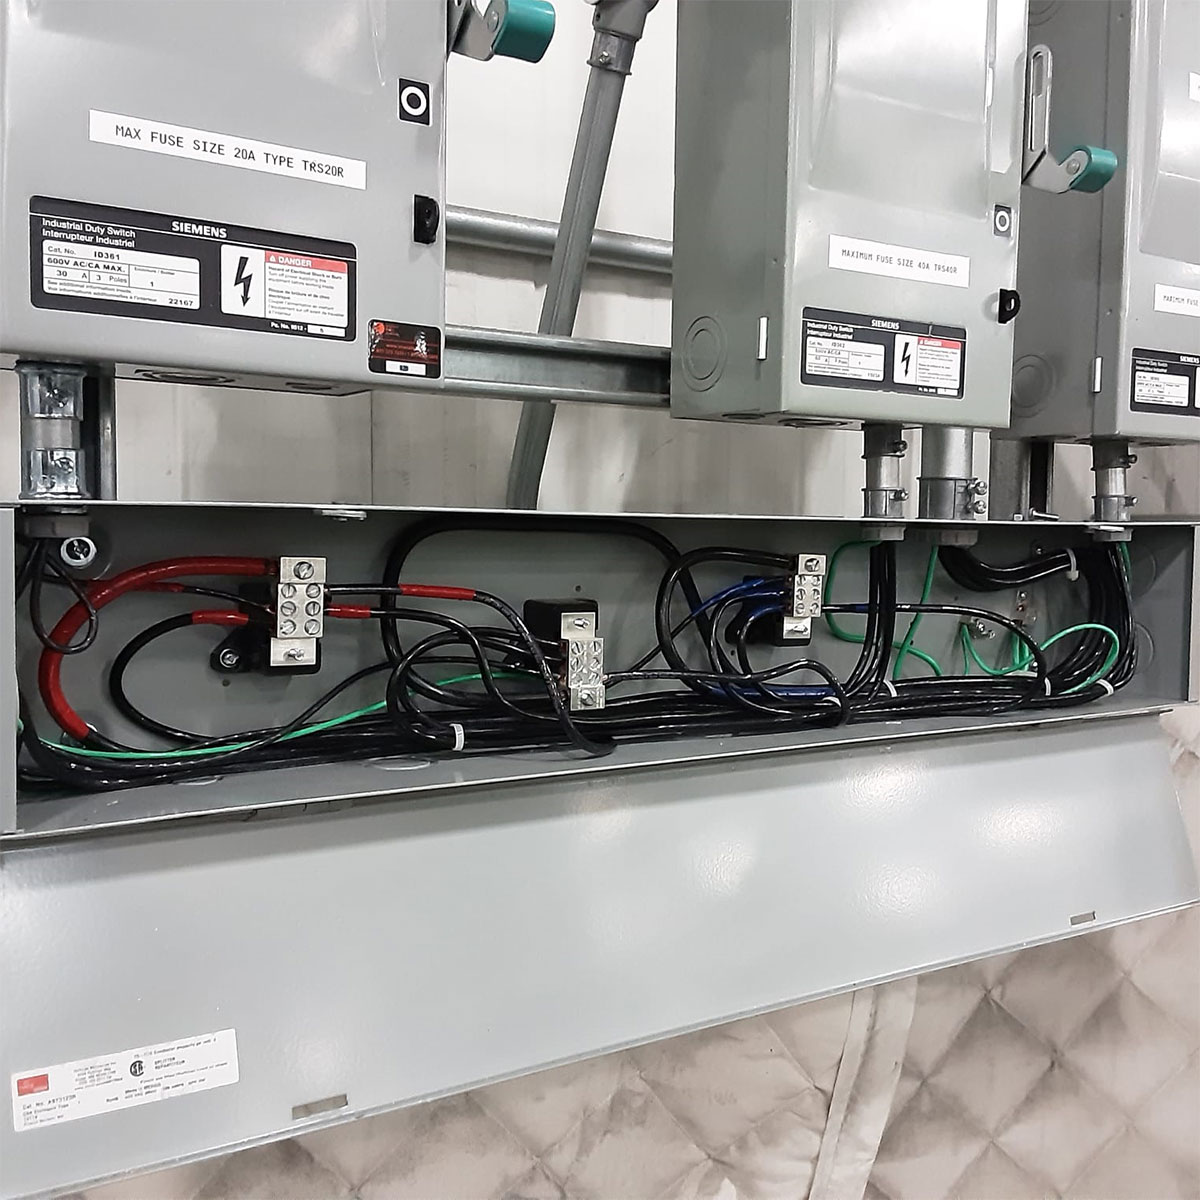 Electric panels installed in industrial setting